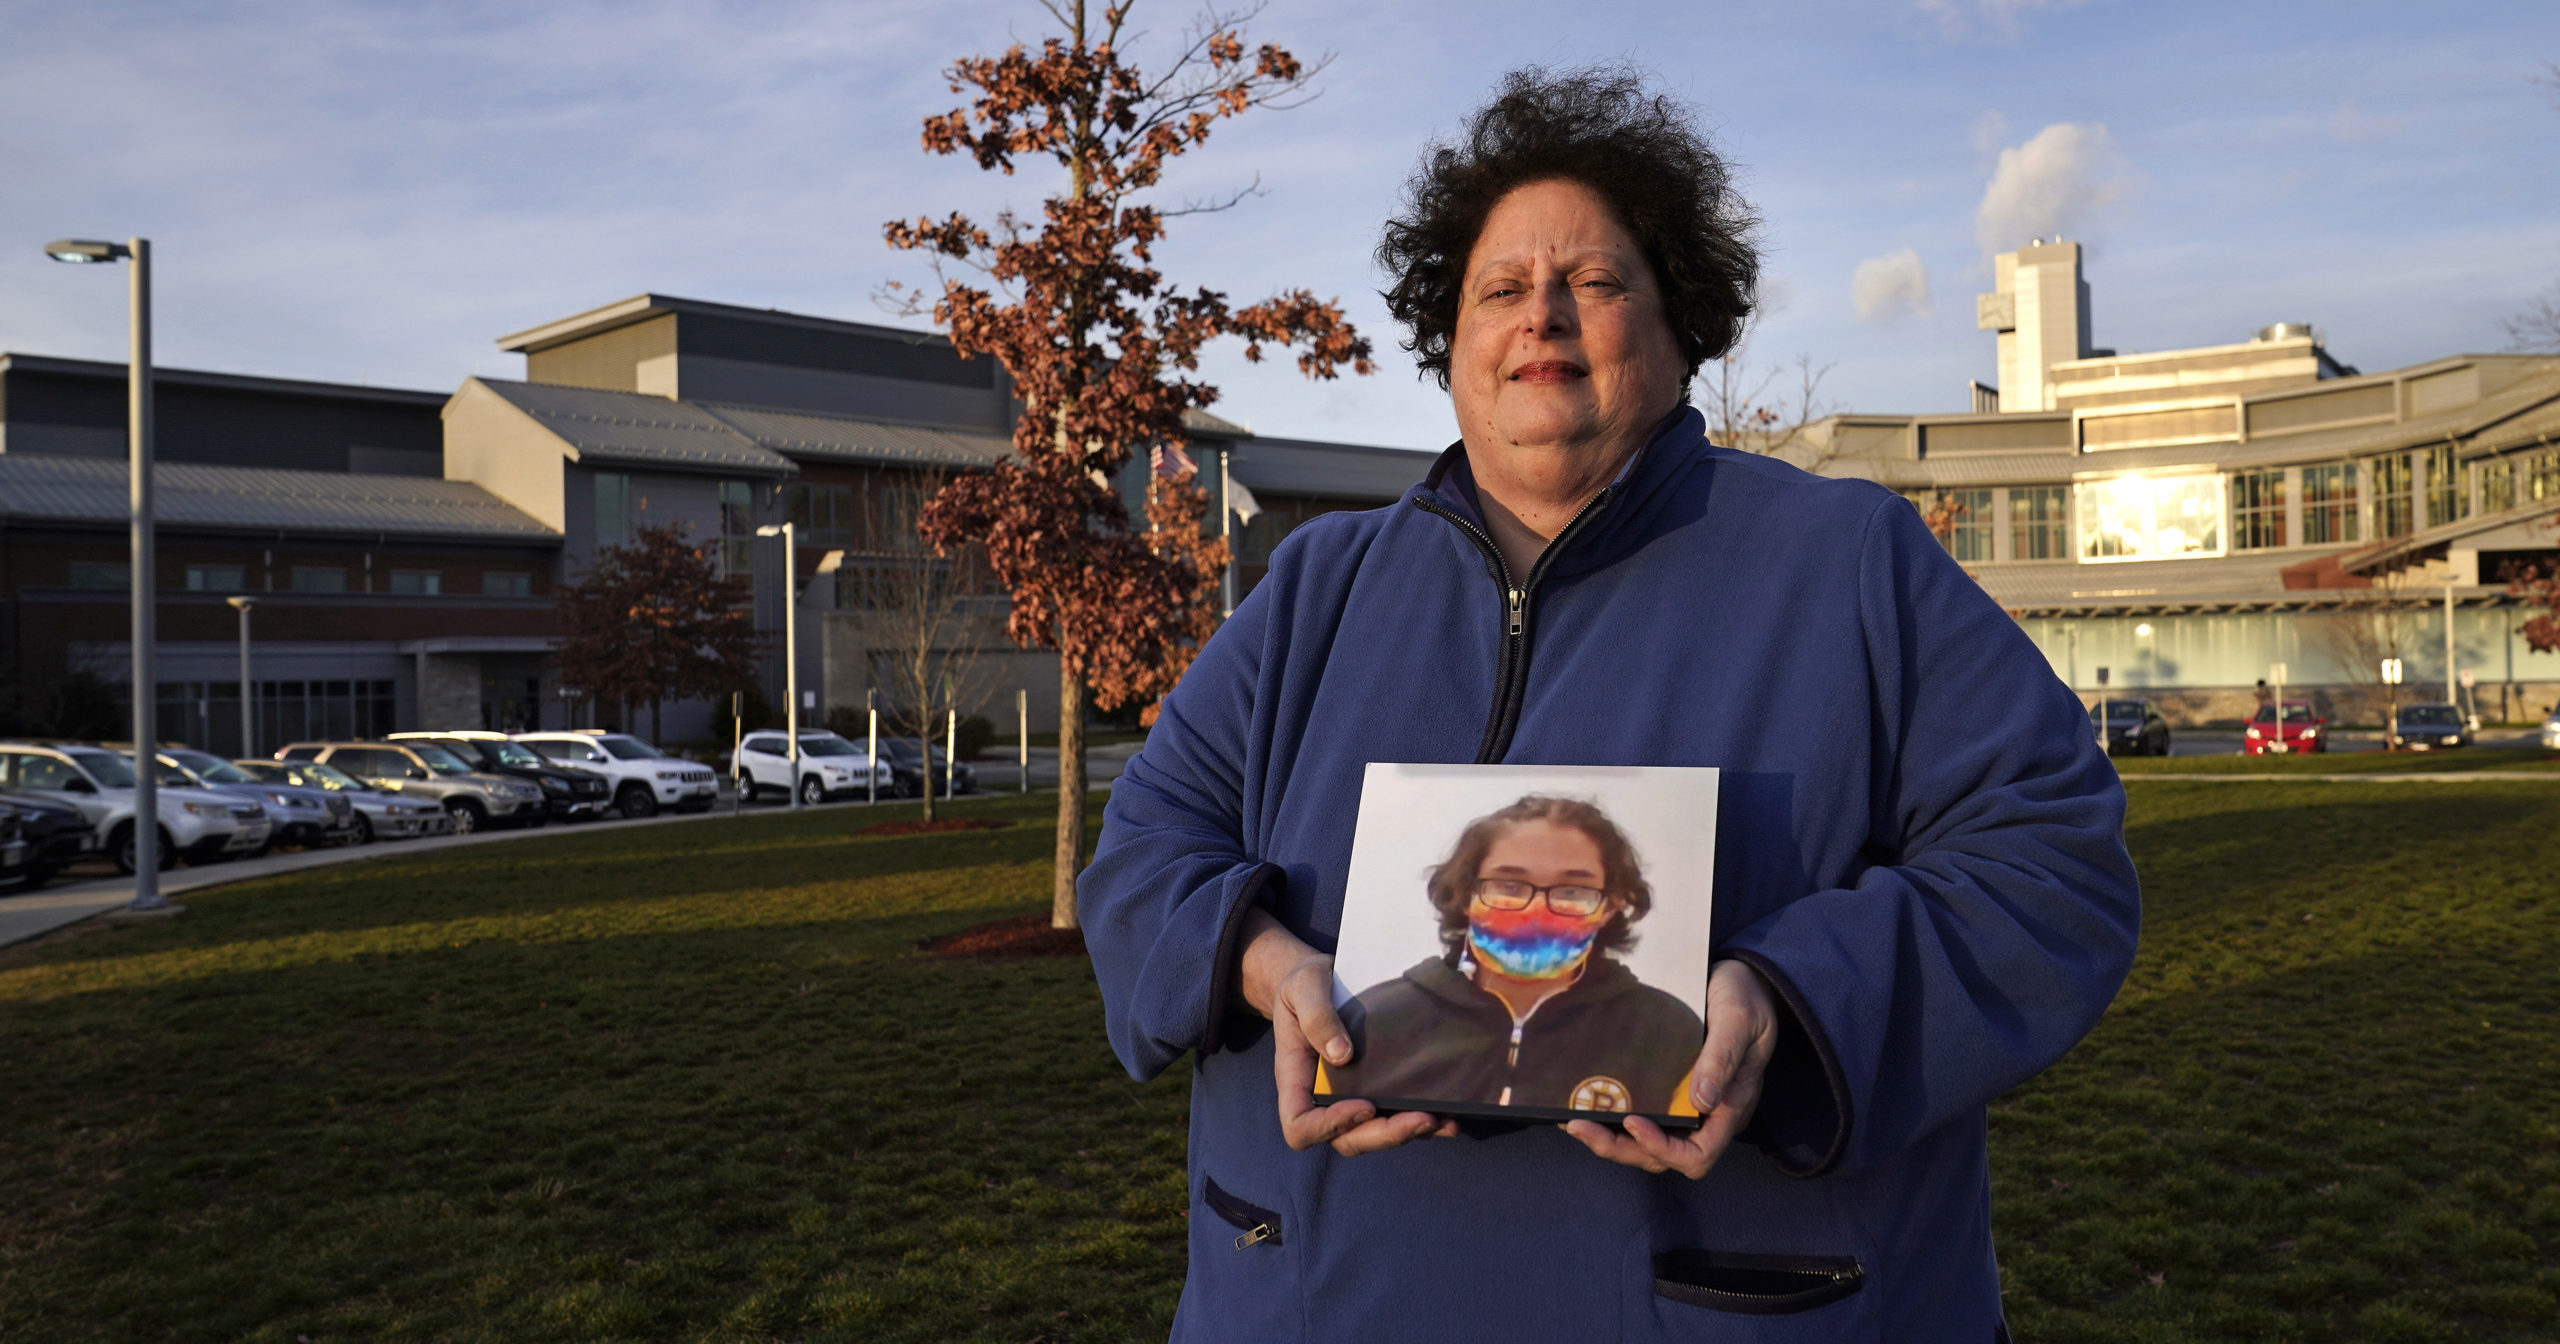 Laura Dilts, of Barre, Massachusetts, holds a photograph of her 16-year-old son outside the Worcester Recovery Center, where he is a resident patient receiving assistance for his mental health, on Nov. 23, 2020, in Worcester, Massachusetts.